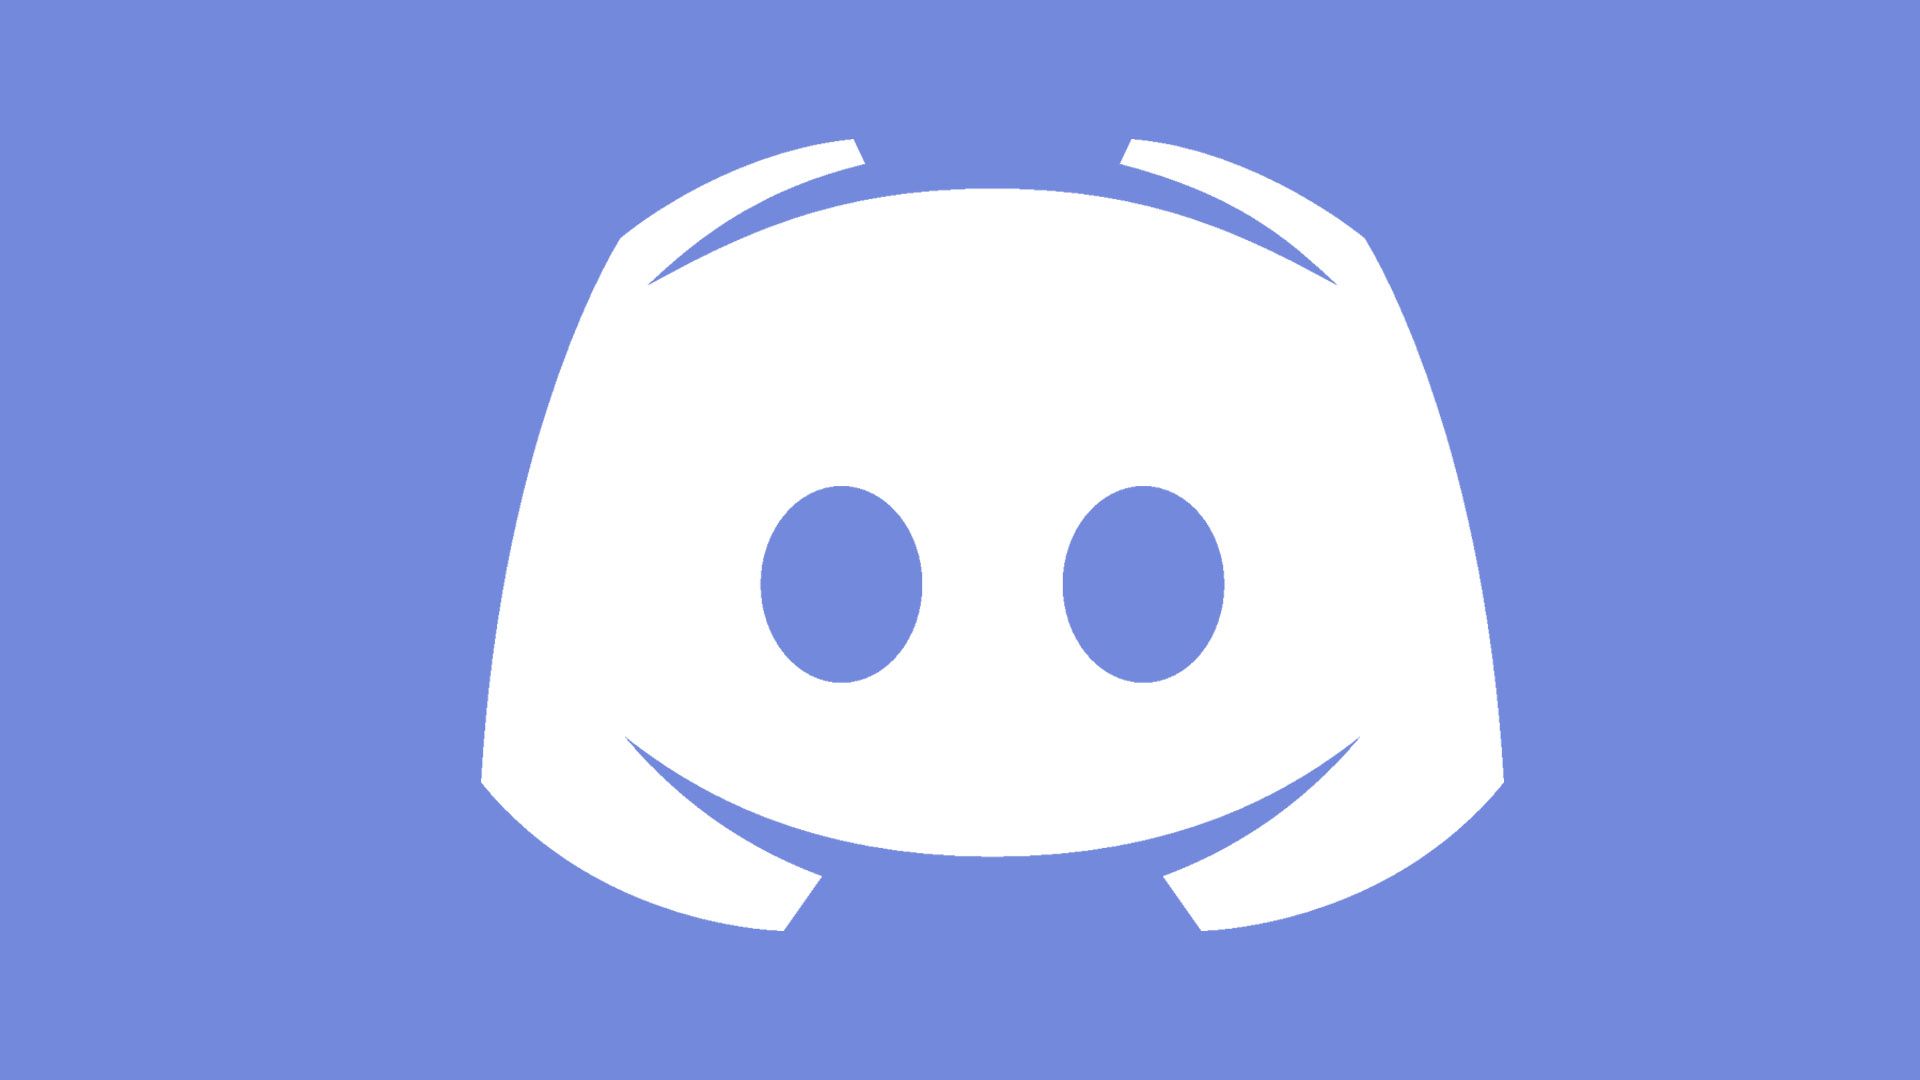 20+ Discord HD Wallpapers and Backgrounds